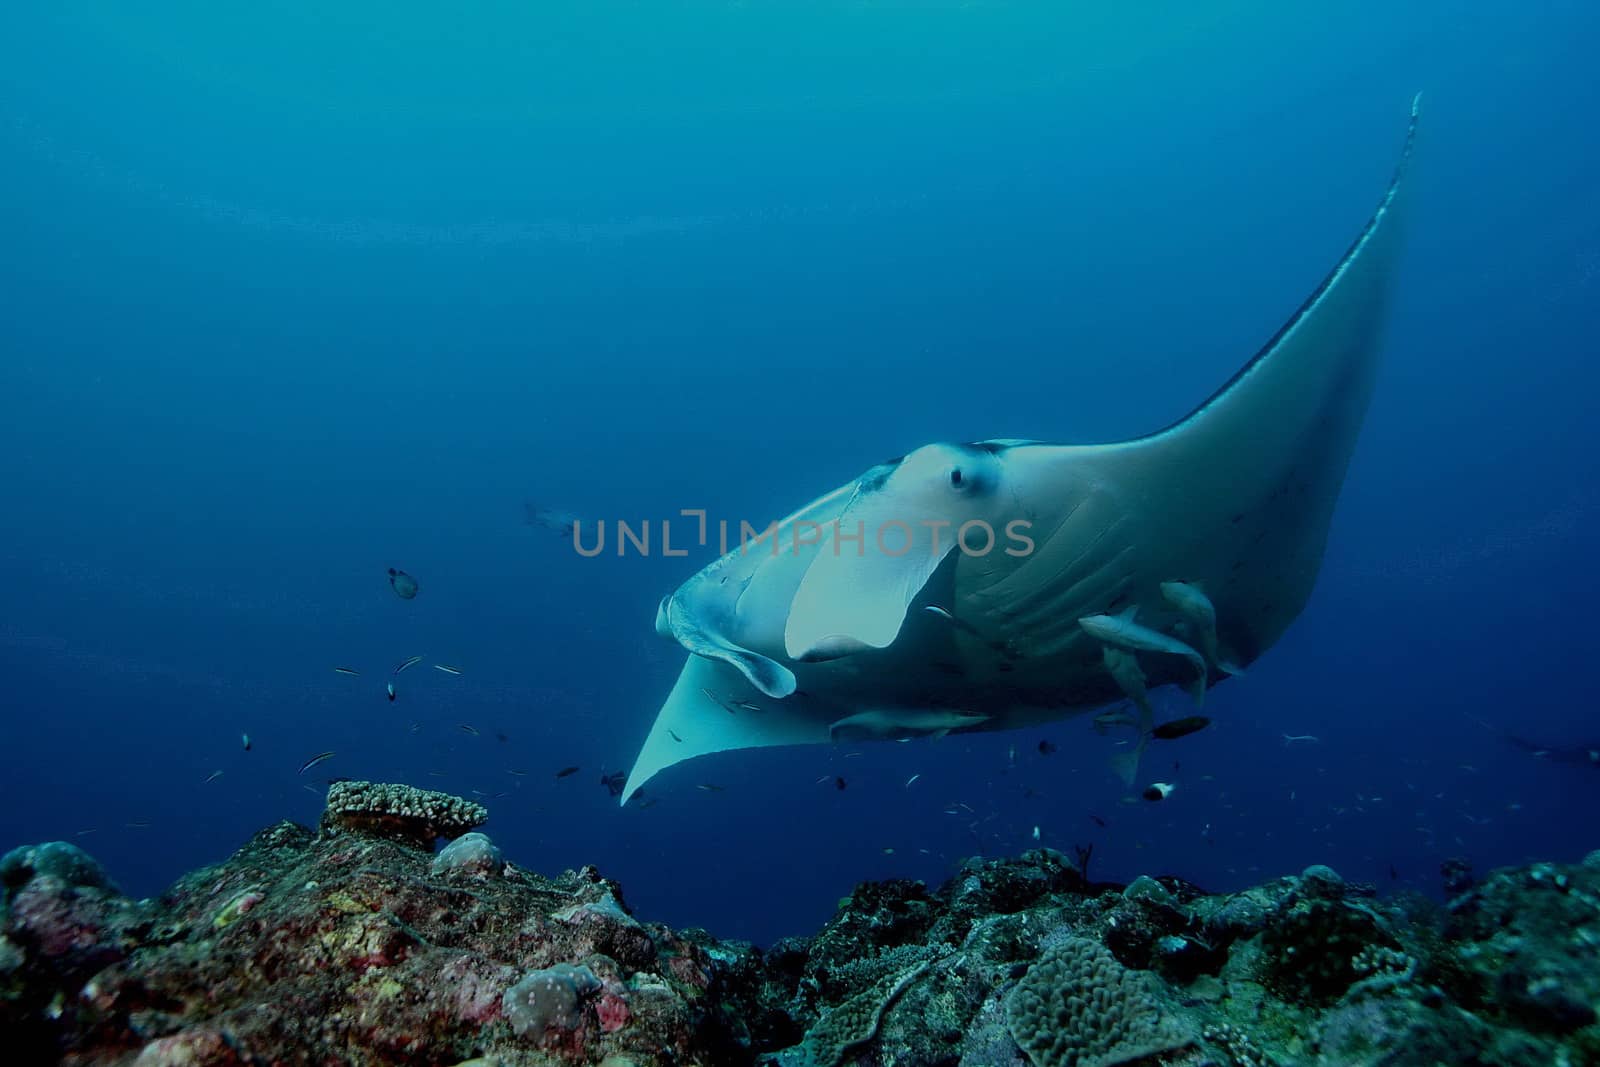 Manta Ray underwater diving photo Maldives Indian Ocean by desant7474